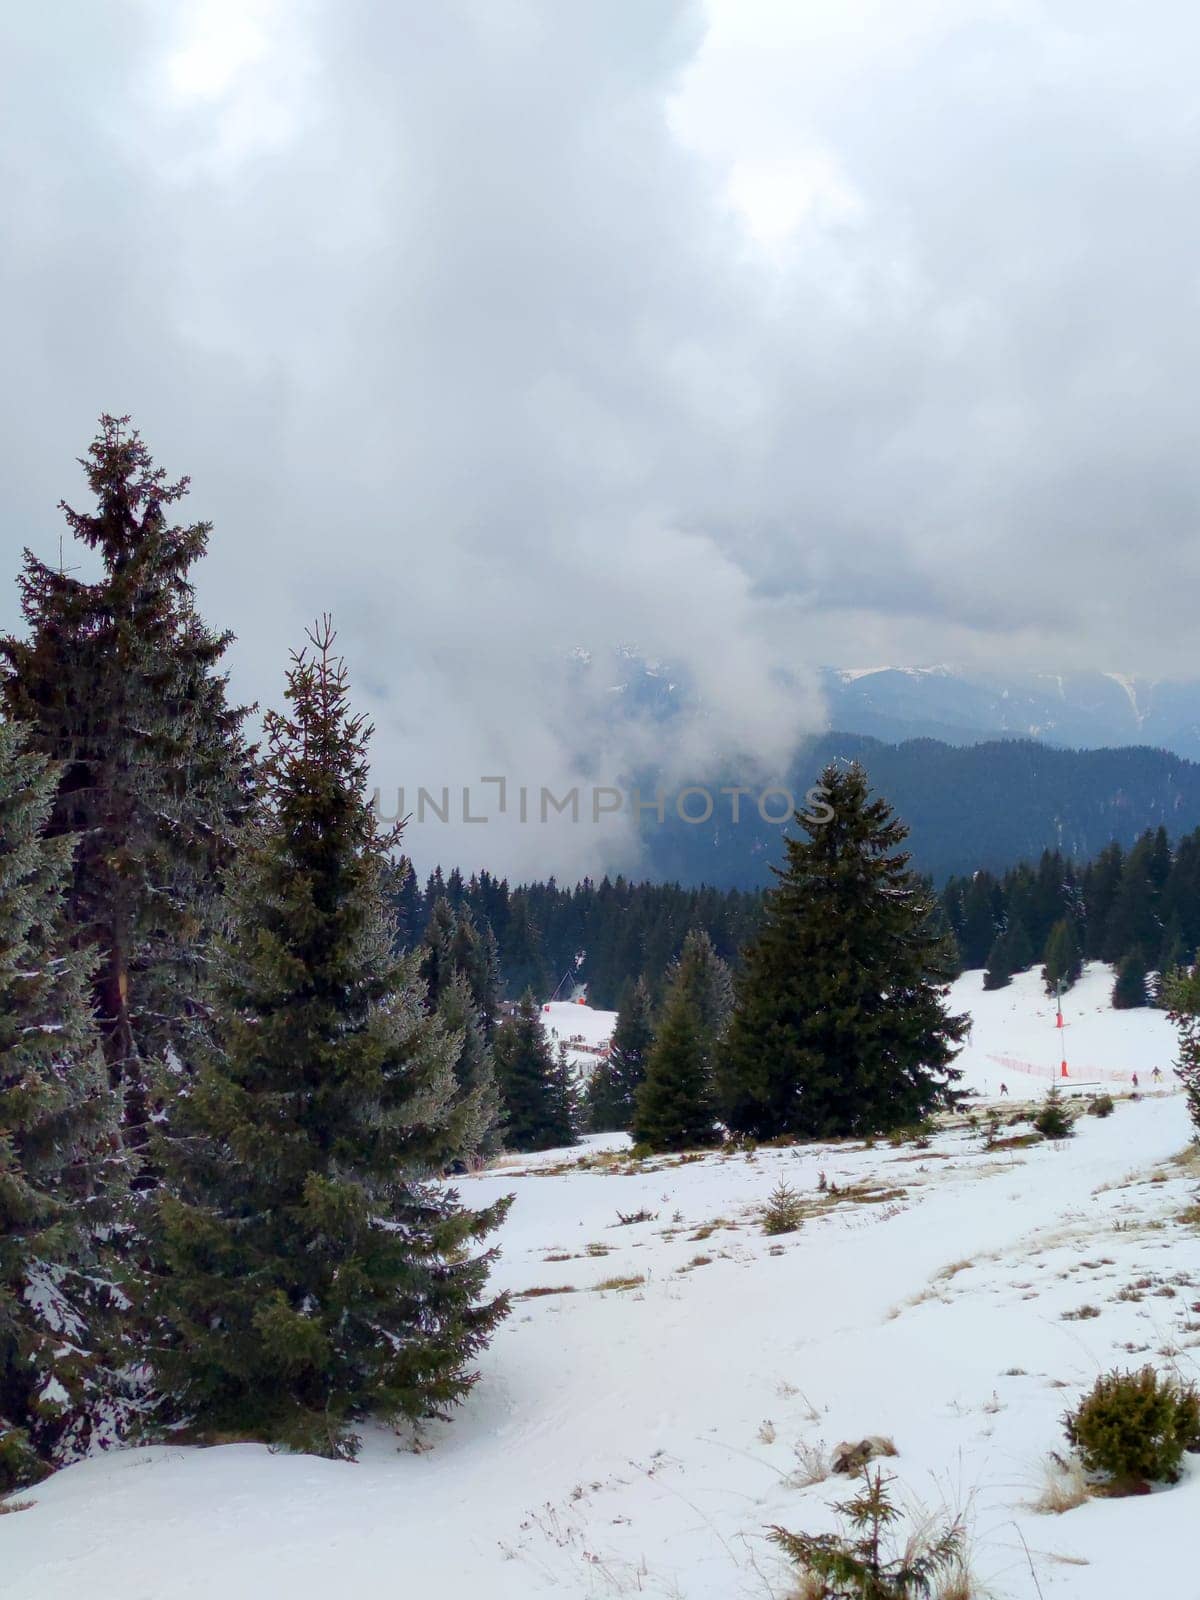 spruce trees against the backdrop of a winter foggy mountain landscape.